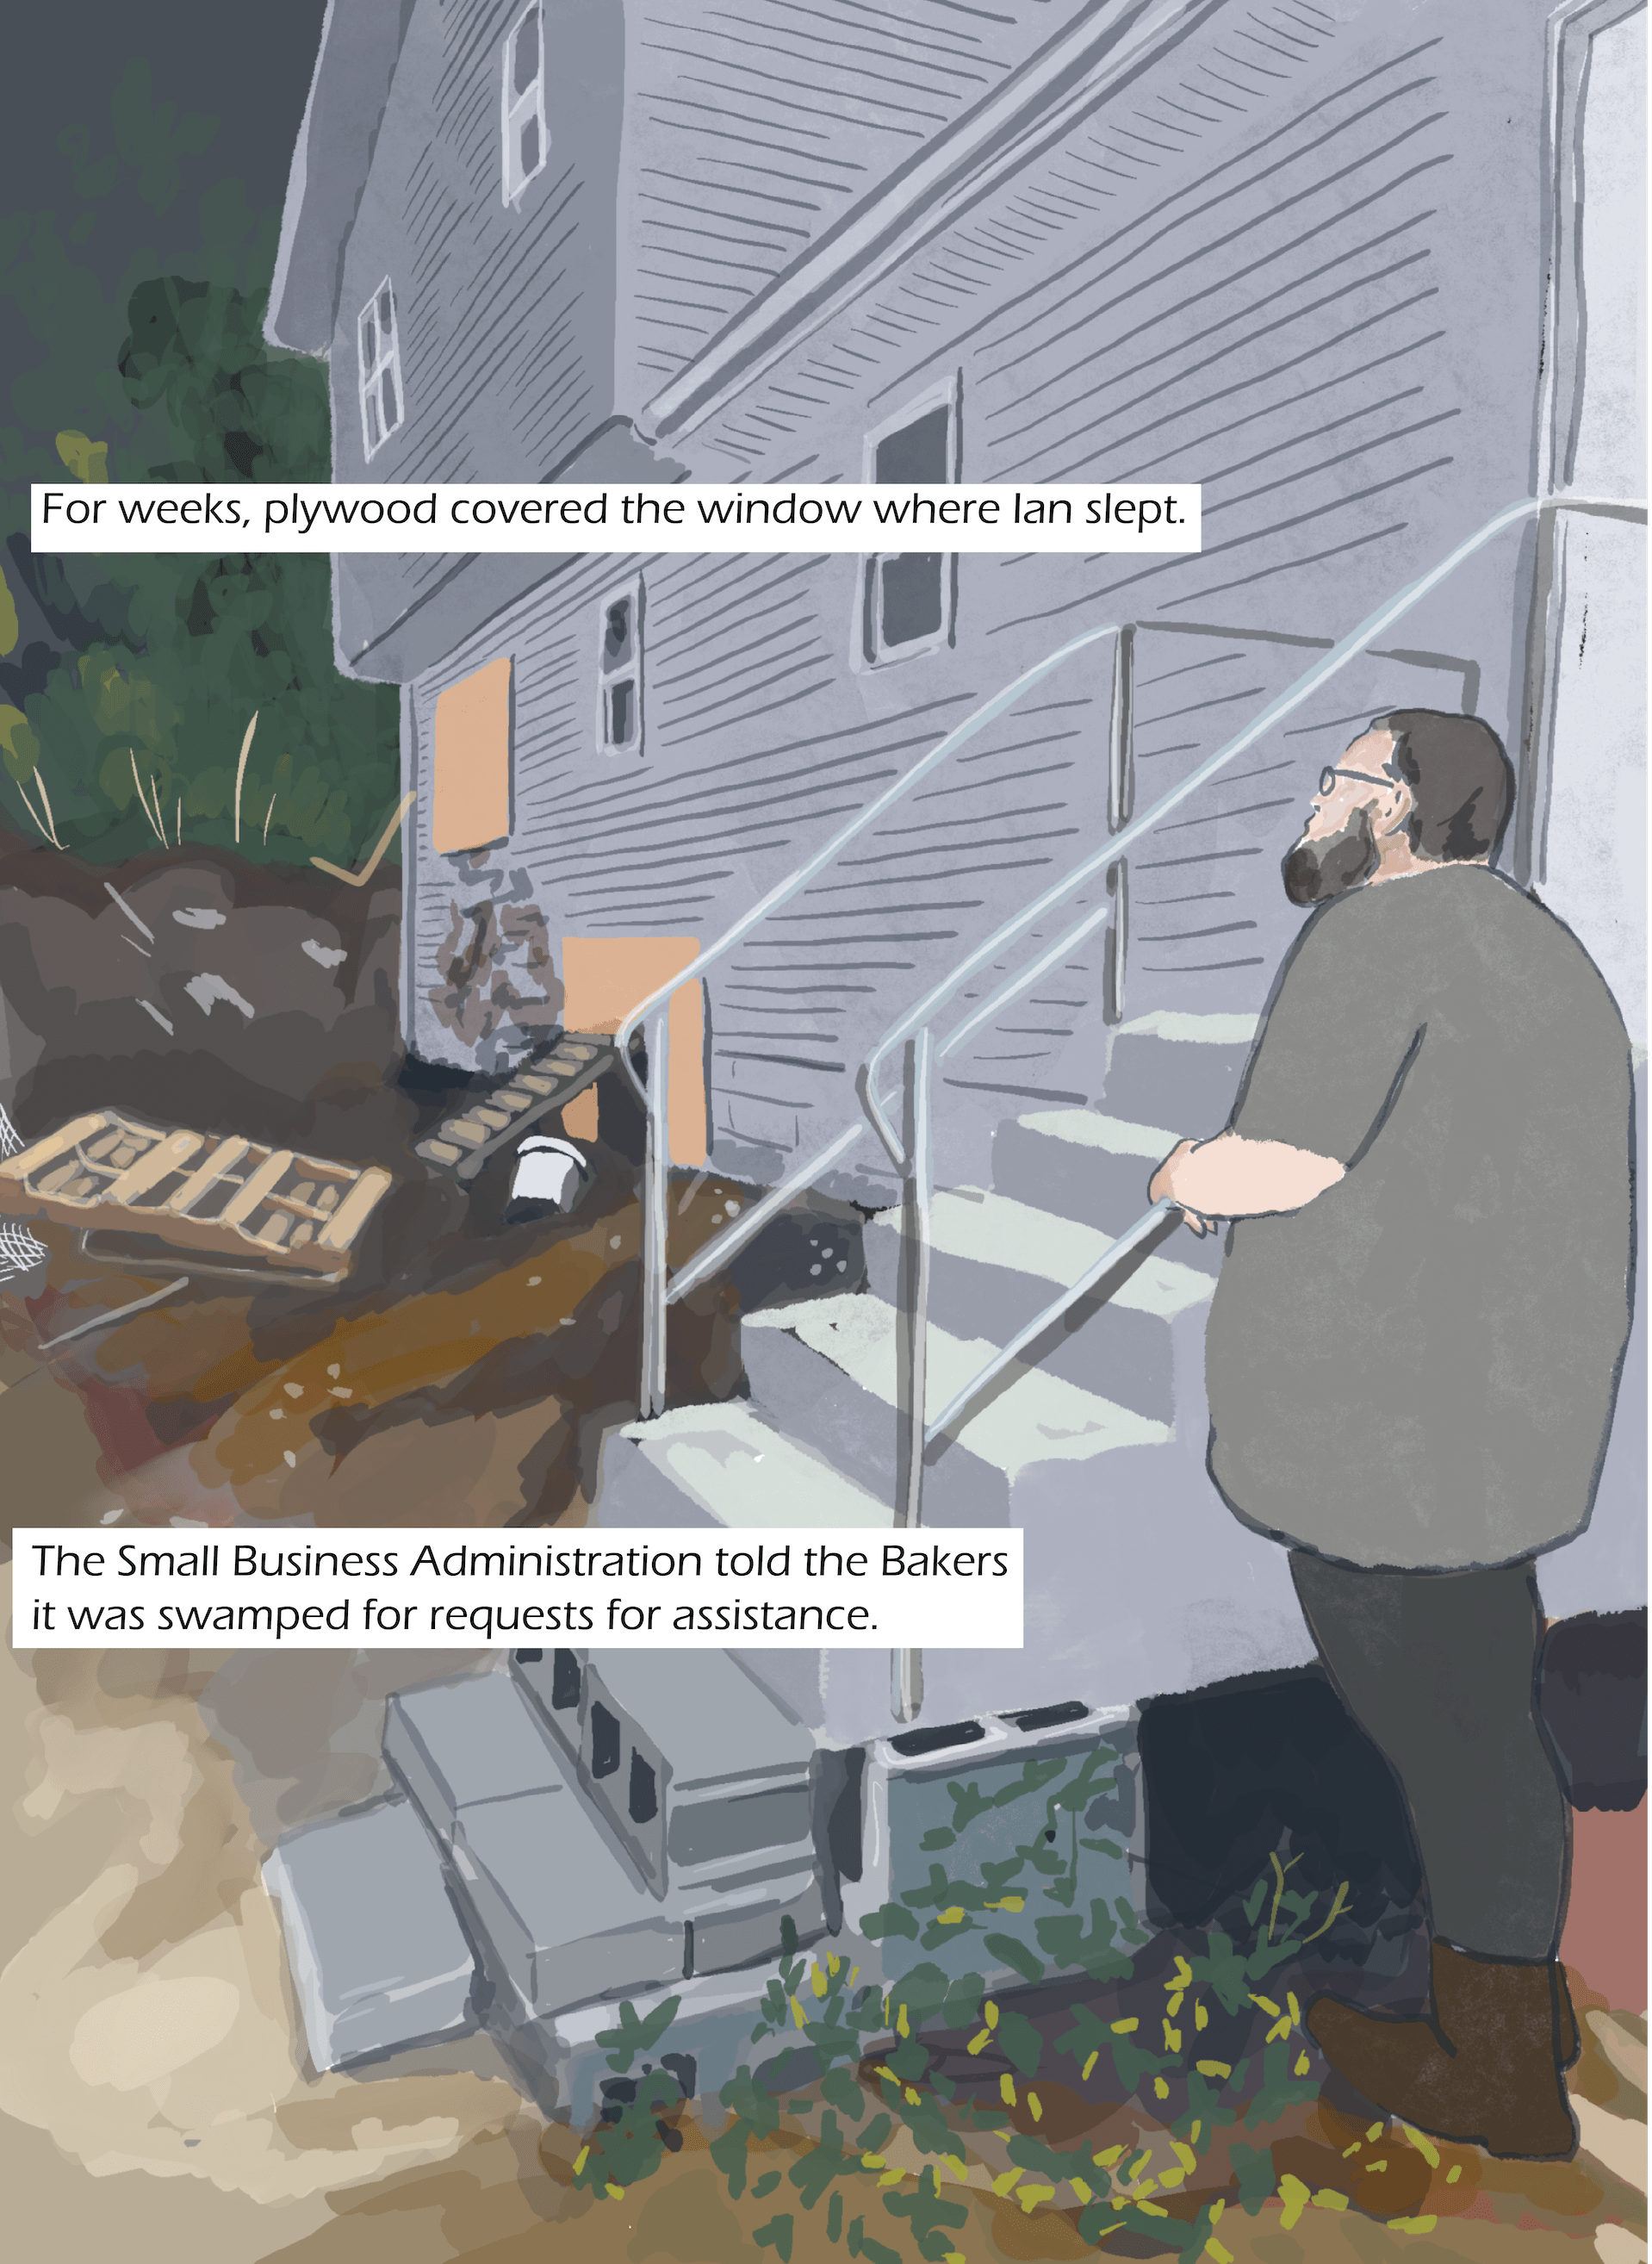 A bearded man stands near steps leading to a house. Text: For weeks, plywood covered the window where Ian slept. The Small Business Administration told the Bakers it was swamped for requests for assistance.